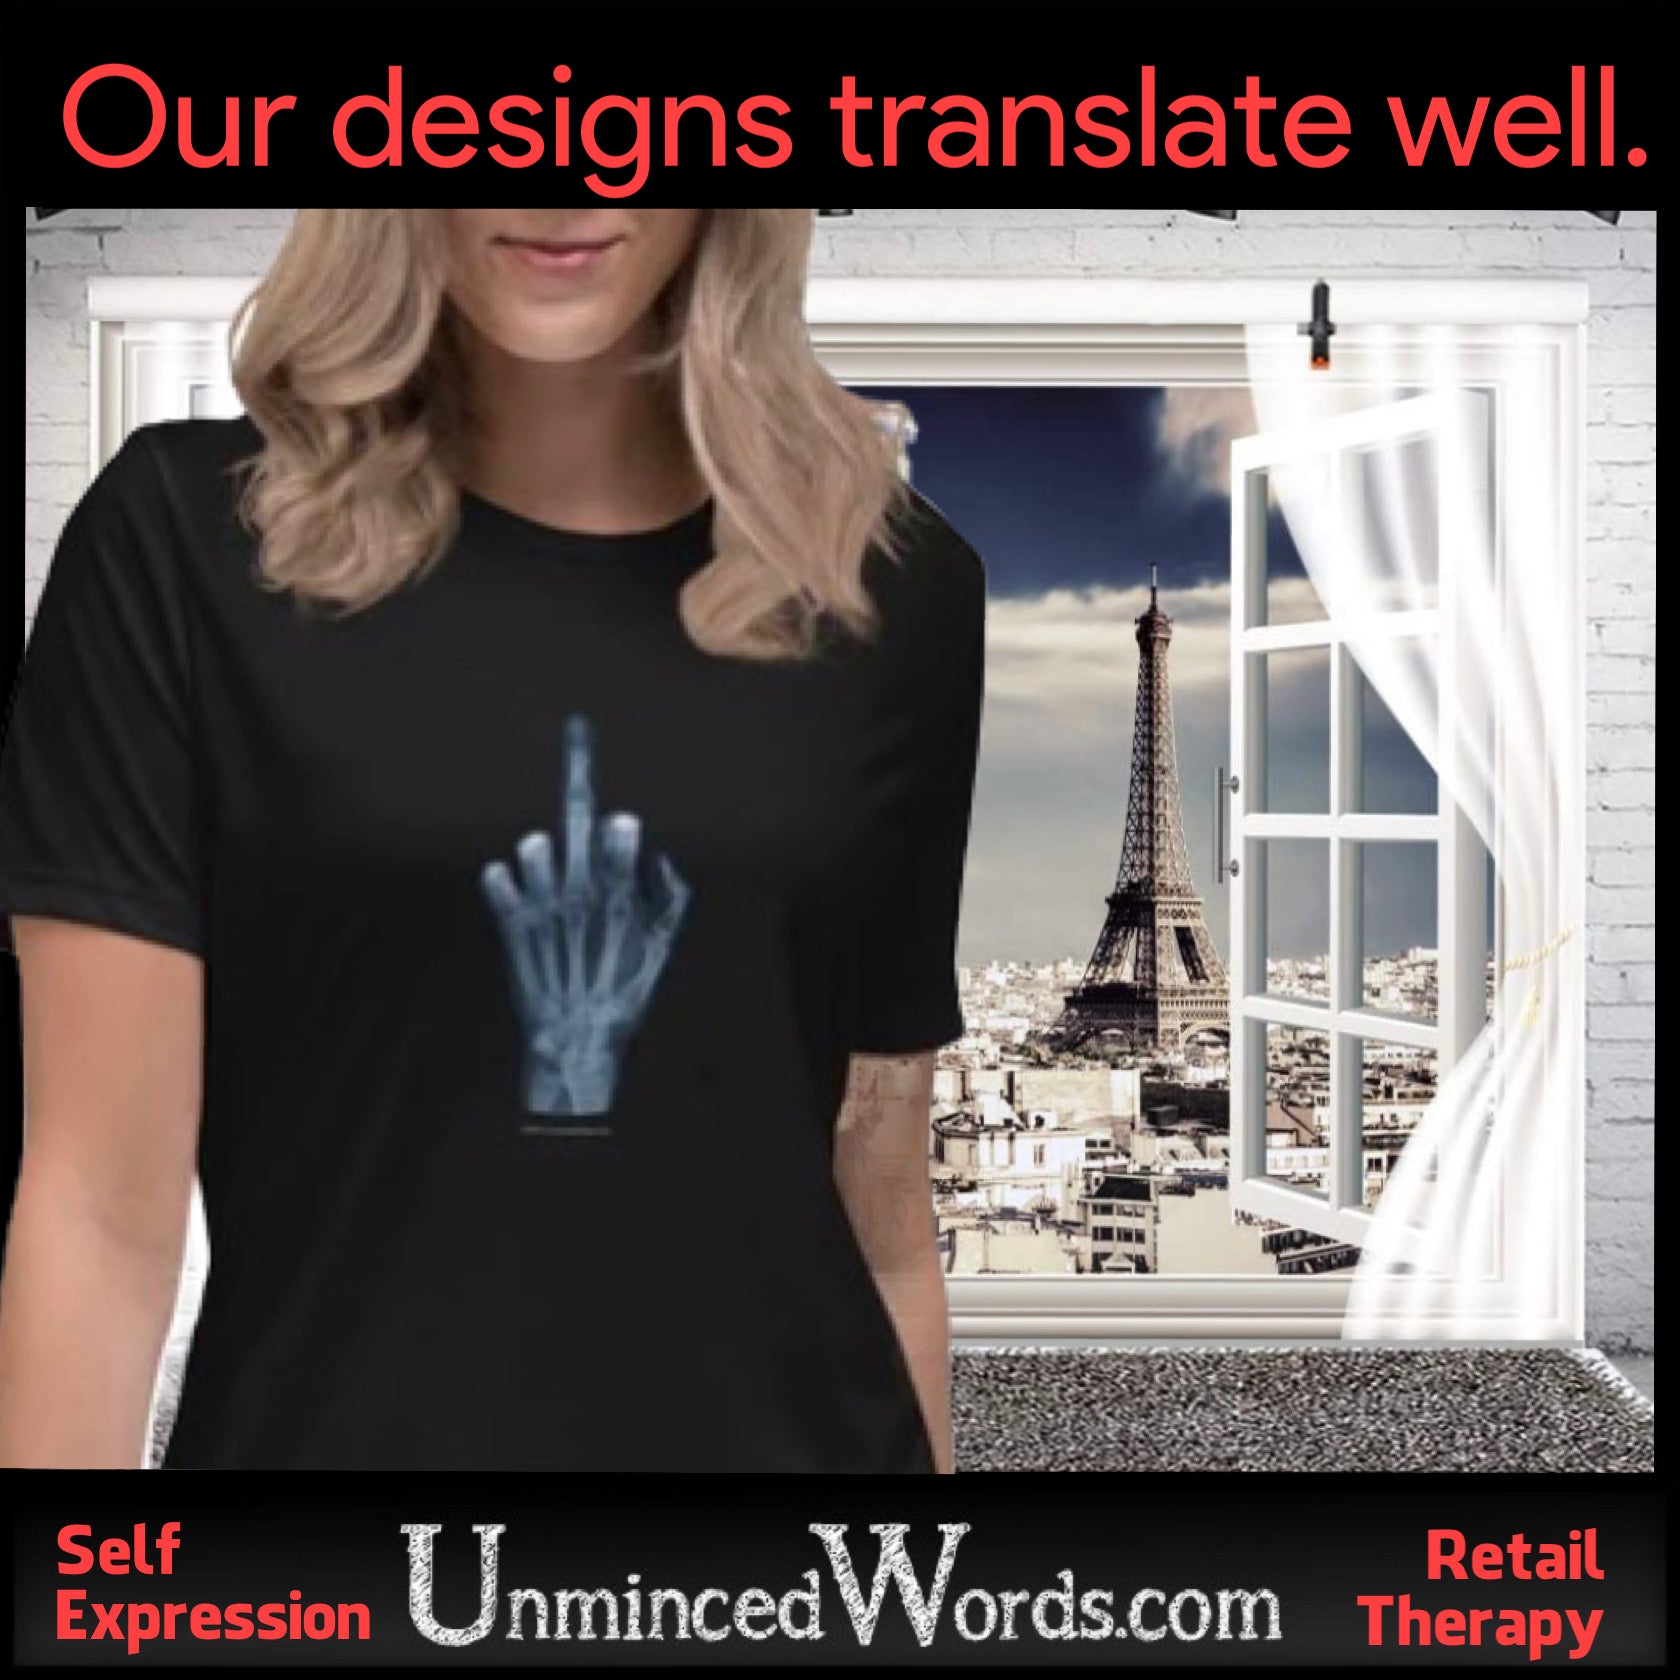 Our designs translate well